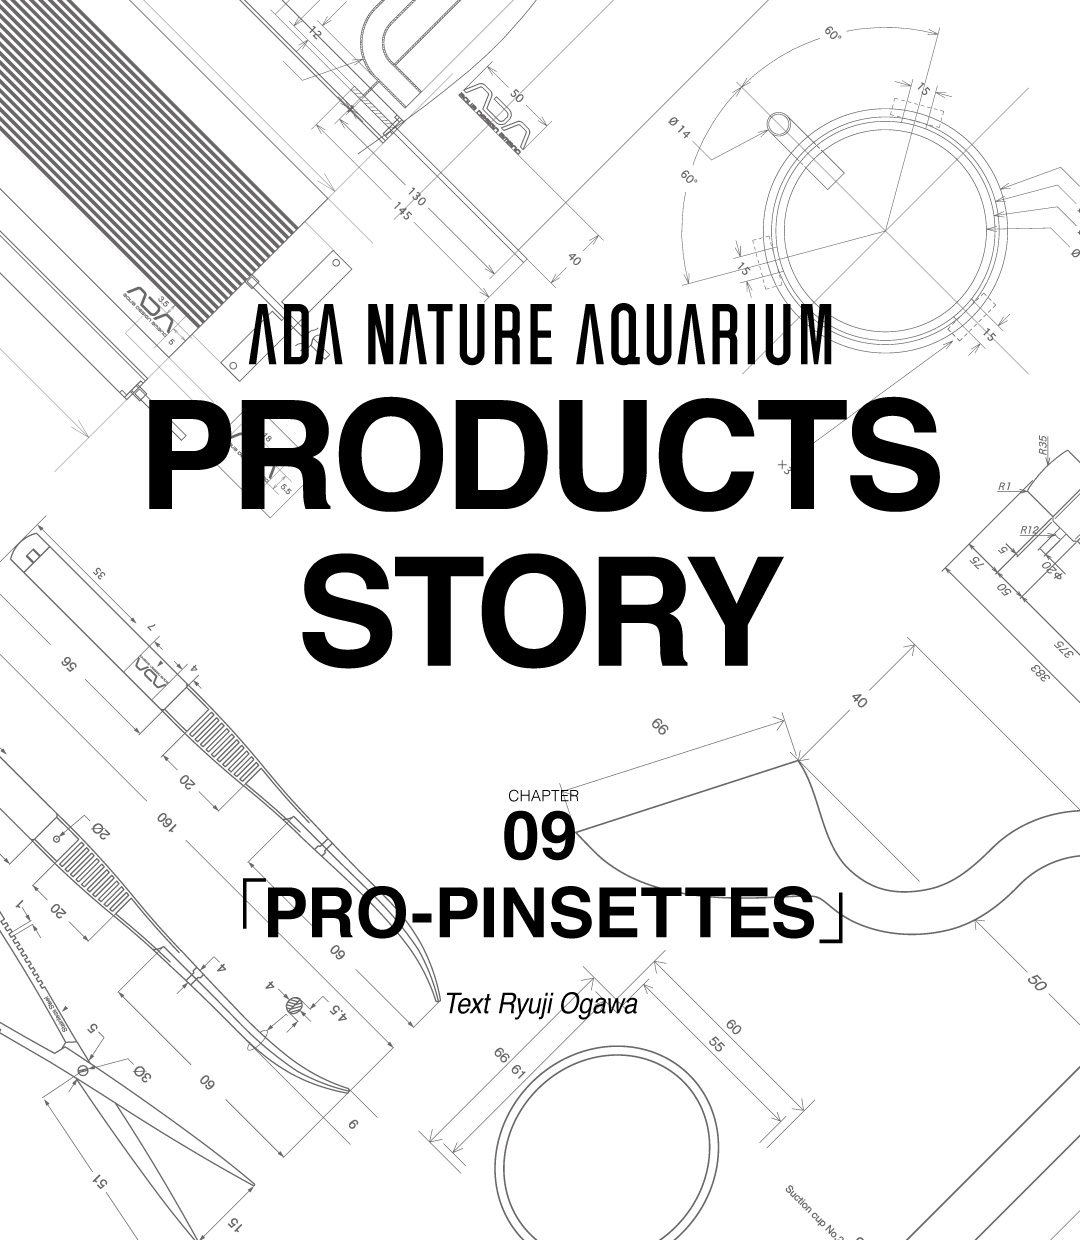 NA PRODUCTS STORY #09  PRO-PINSETTES